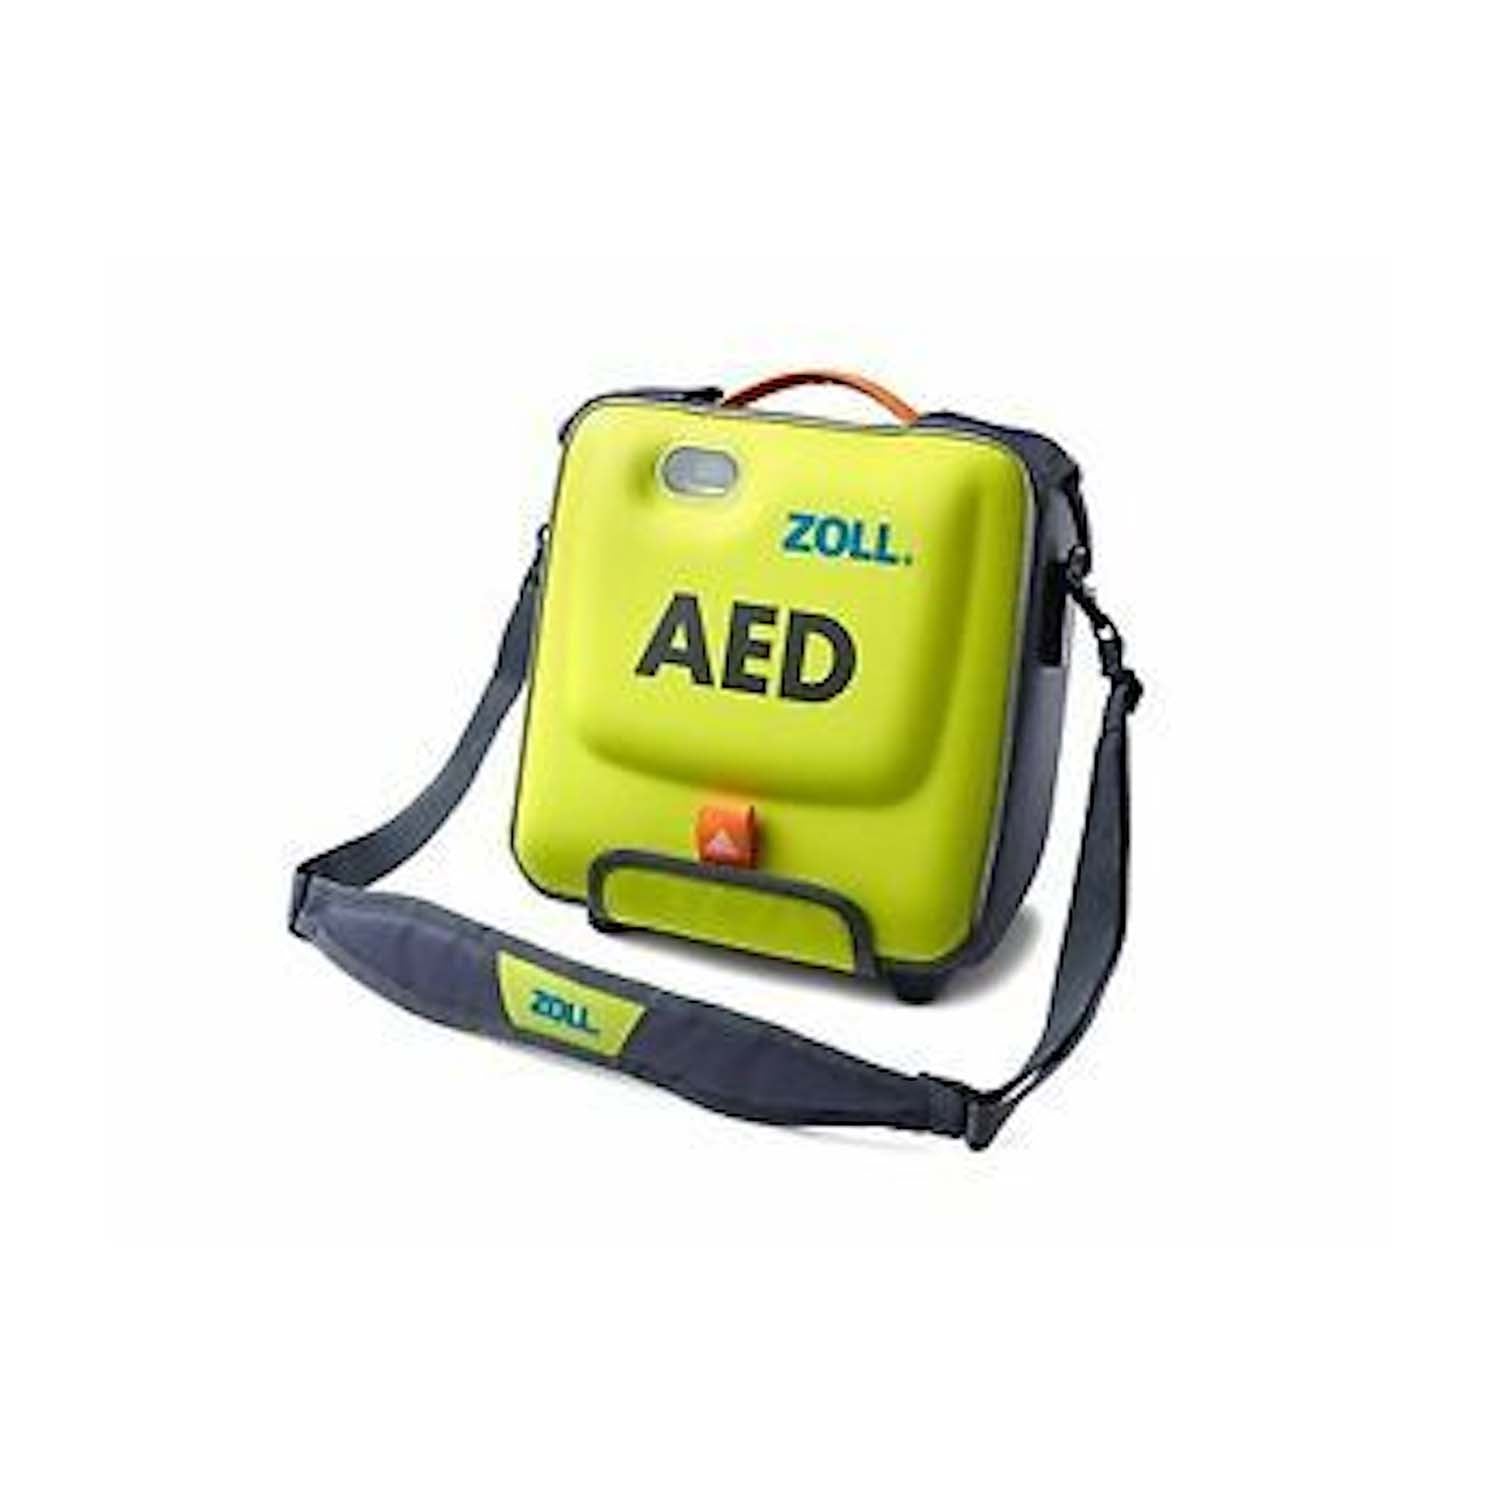 Zoll AED 3 Carry Case Replacement Shoulder Strap